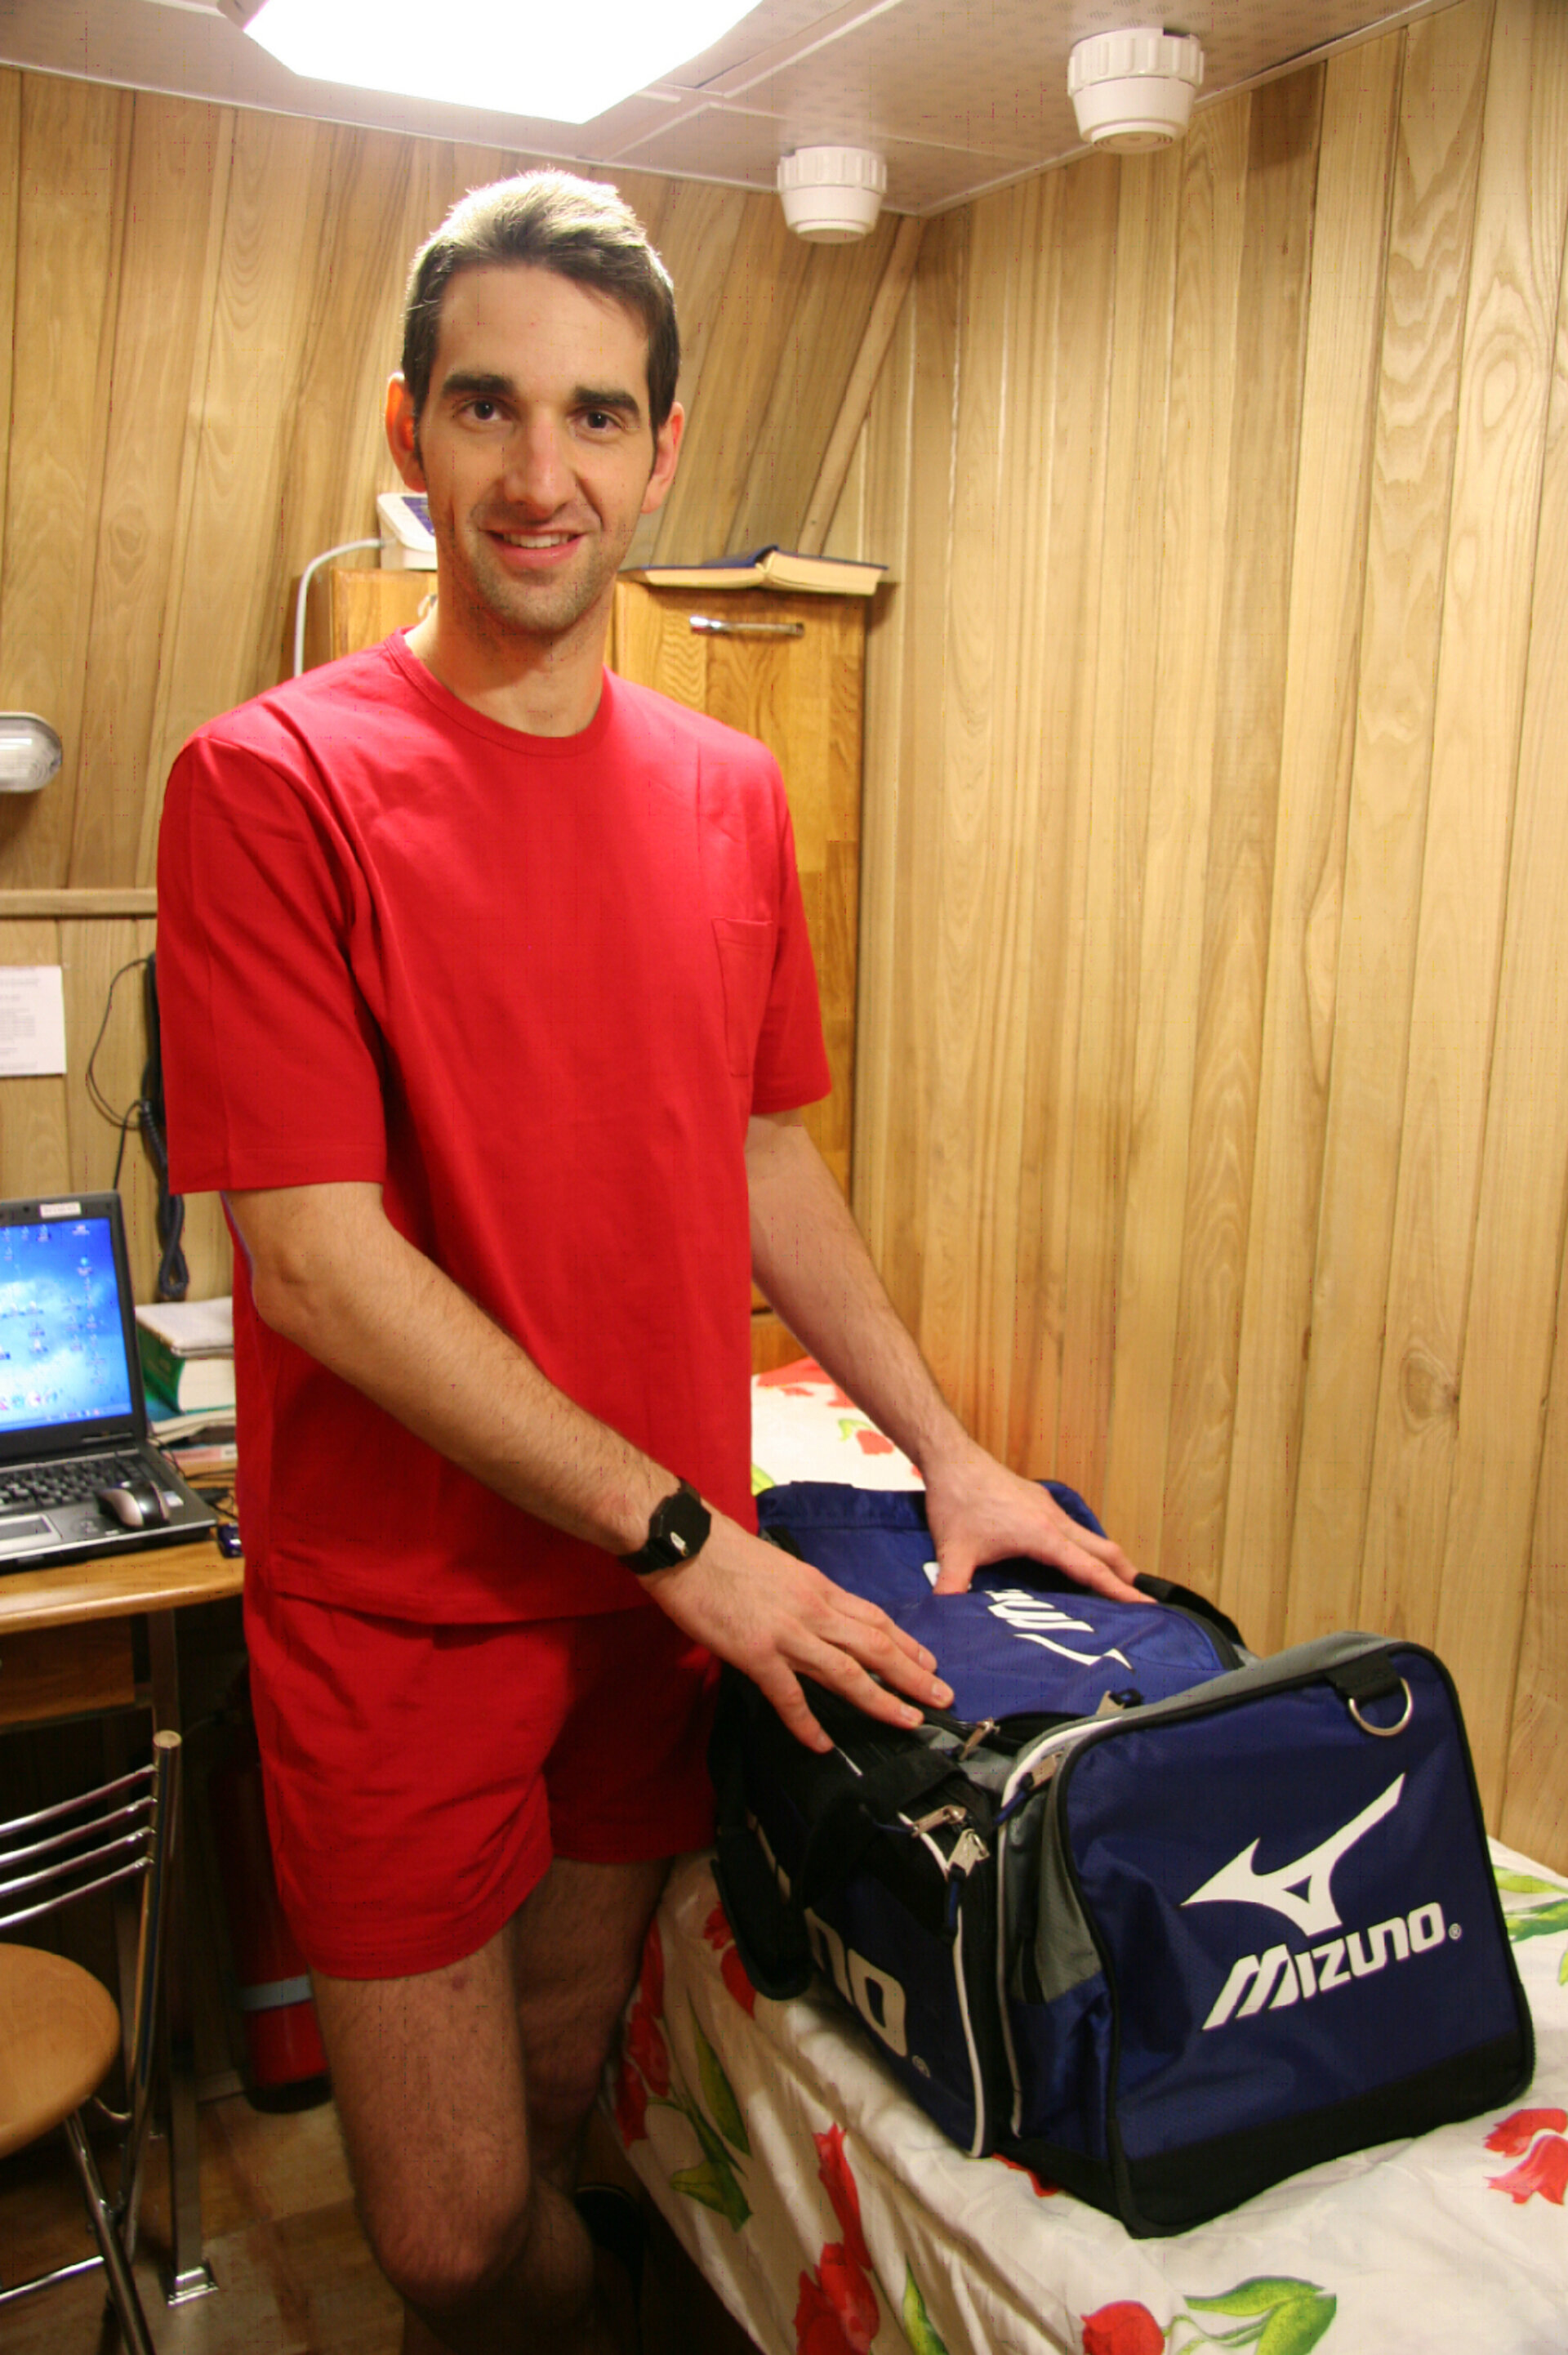 Oliver packs his bag at the end of the 105-day study